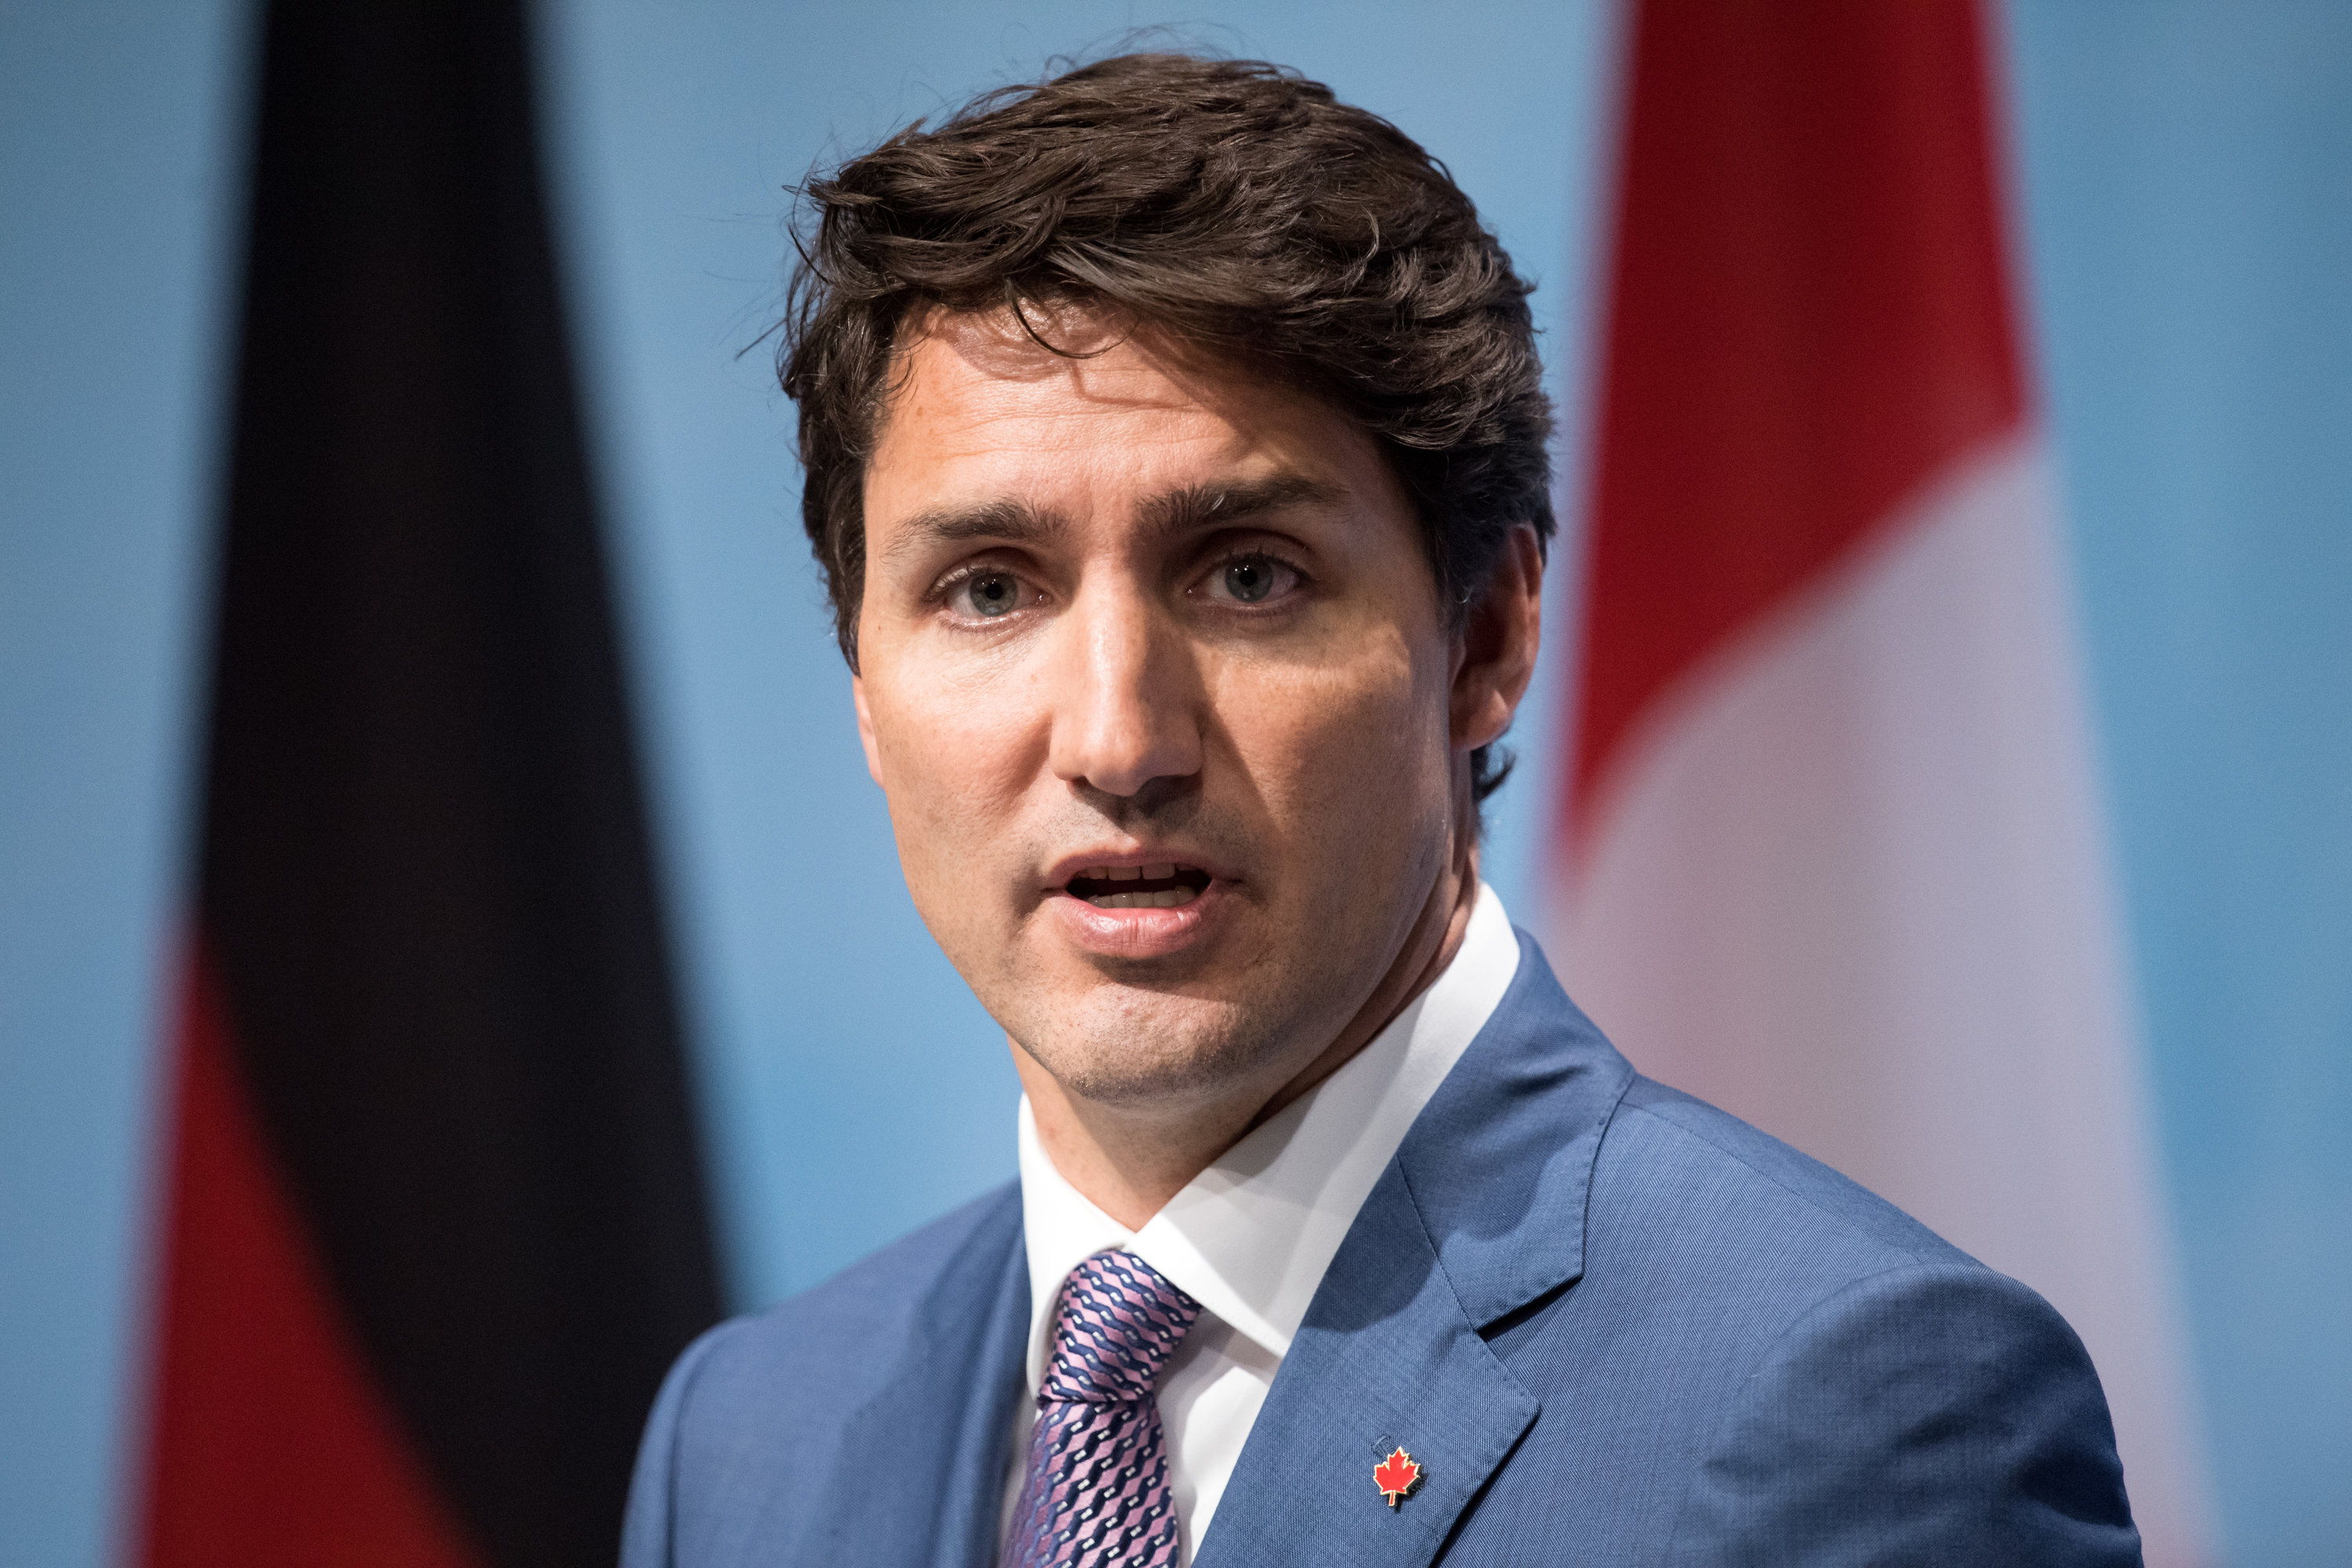 FILED - 08 July 2017, Hamburg: Canadian Prime Minister Justin Trudeau speaks during a press confrence at the conclusion of the two day G20 Summit. A video reportedly showing Canadian Prime Minister Justin Trudeau in blackface surfaced on Thursday, becoming the third instance of past racist behaviour by the leader seeking re-election. Photo: Bernd von Jutrczenka/dpa